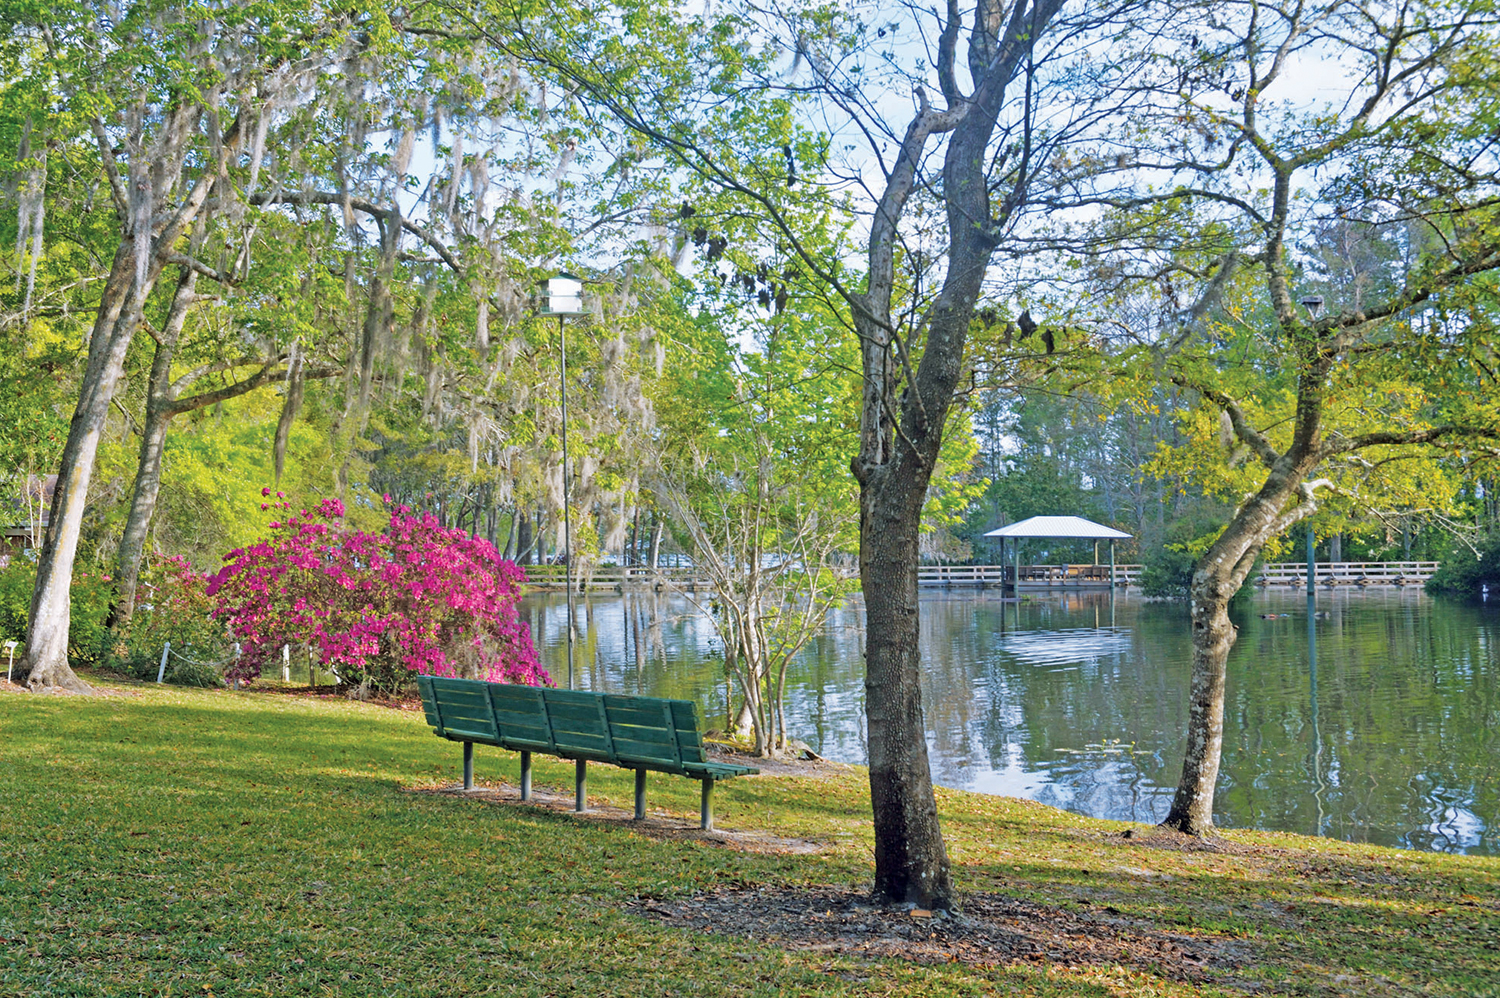 7 Big Benefits Of Outdoor Time At Independent Living In Jacksonville, FL